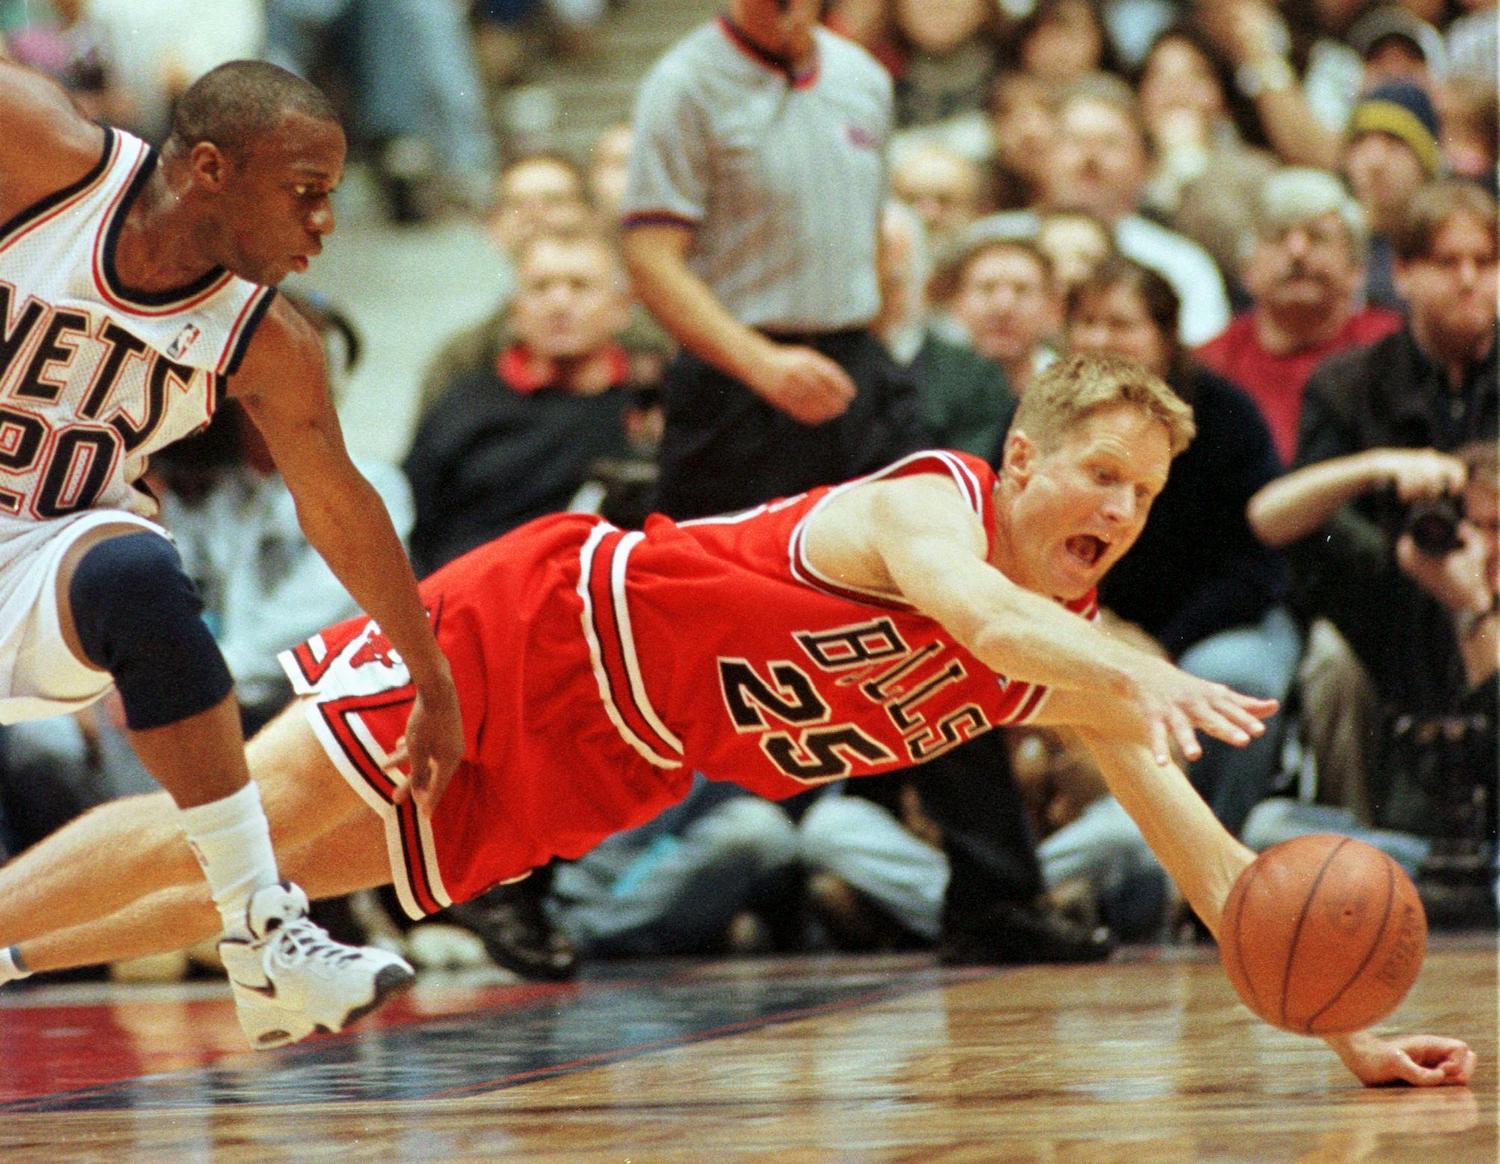 Chicago Bulls guard Steve Kerr dives to corral a loose ball.